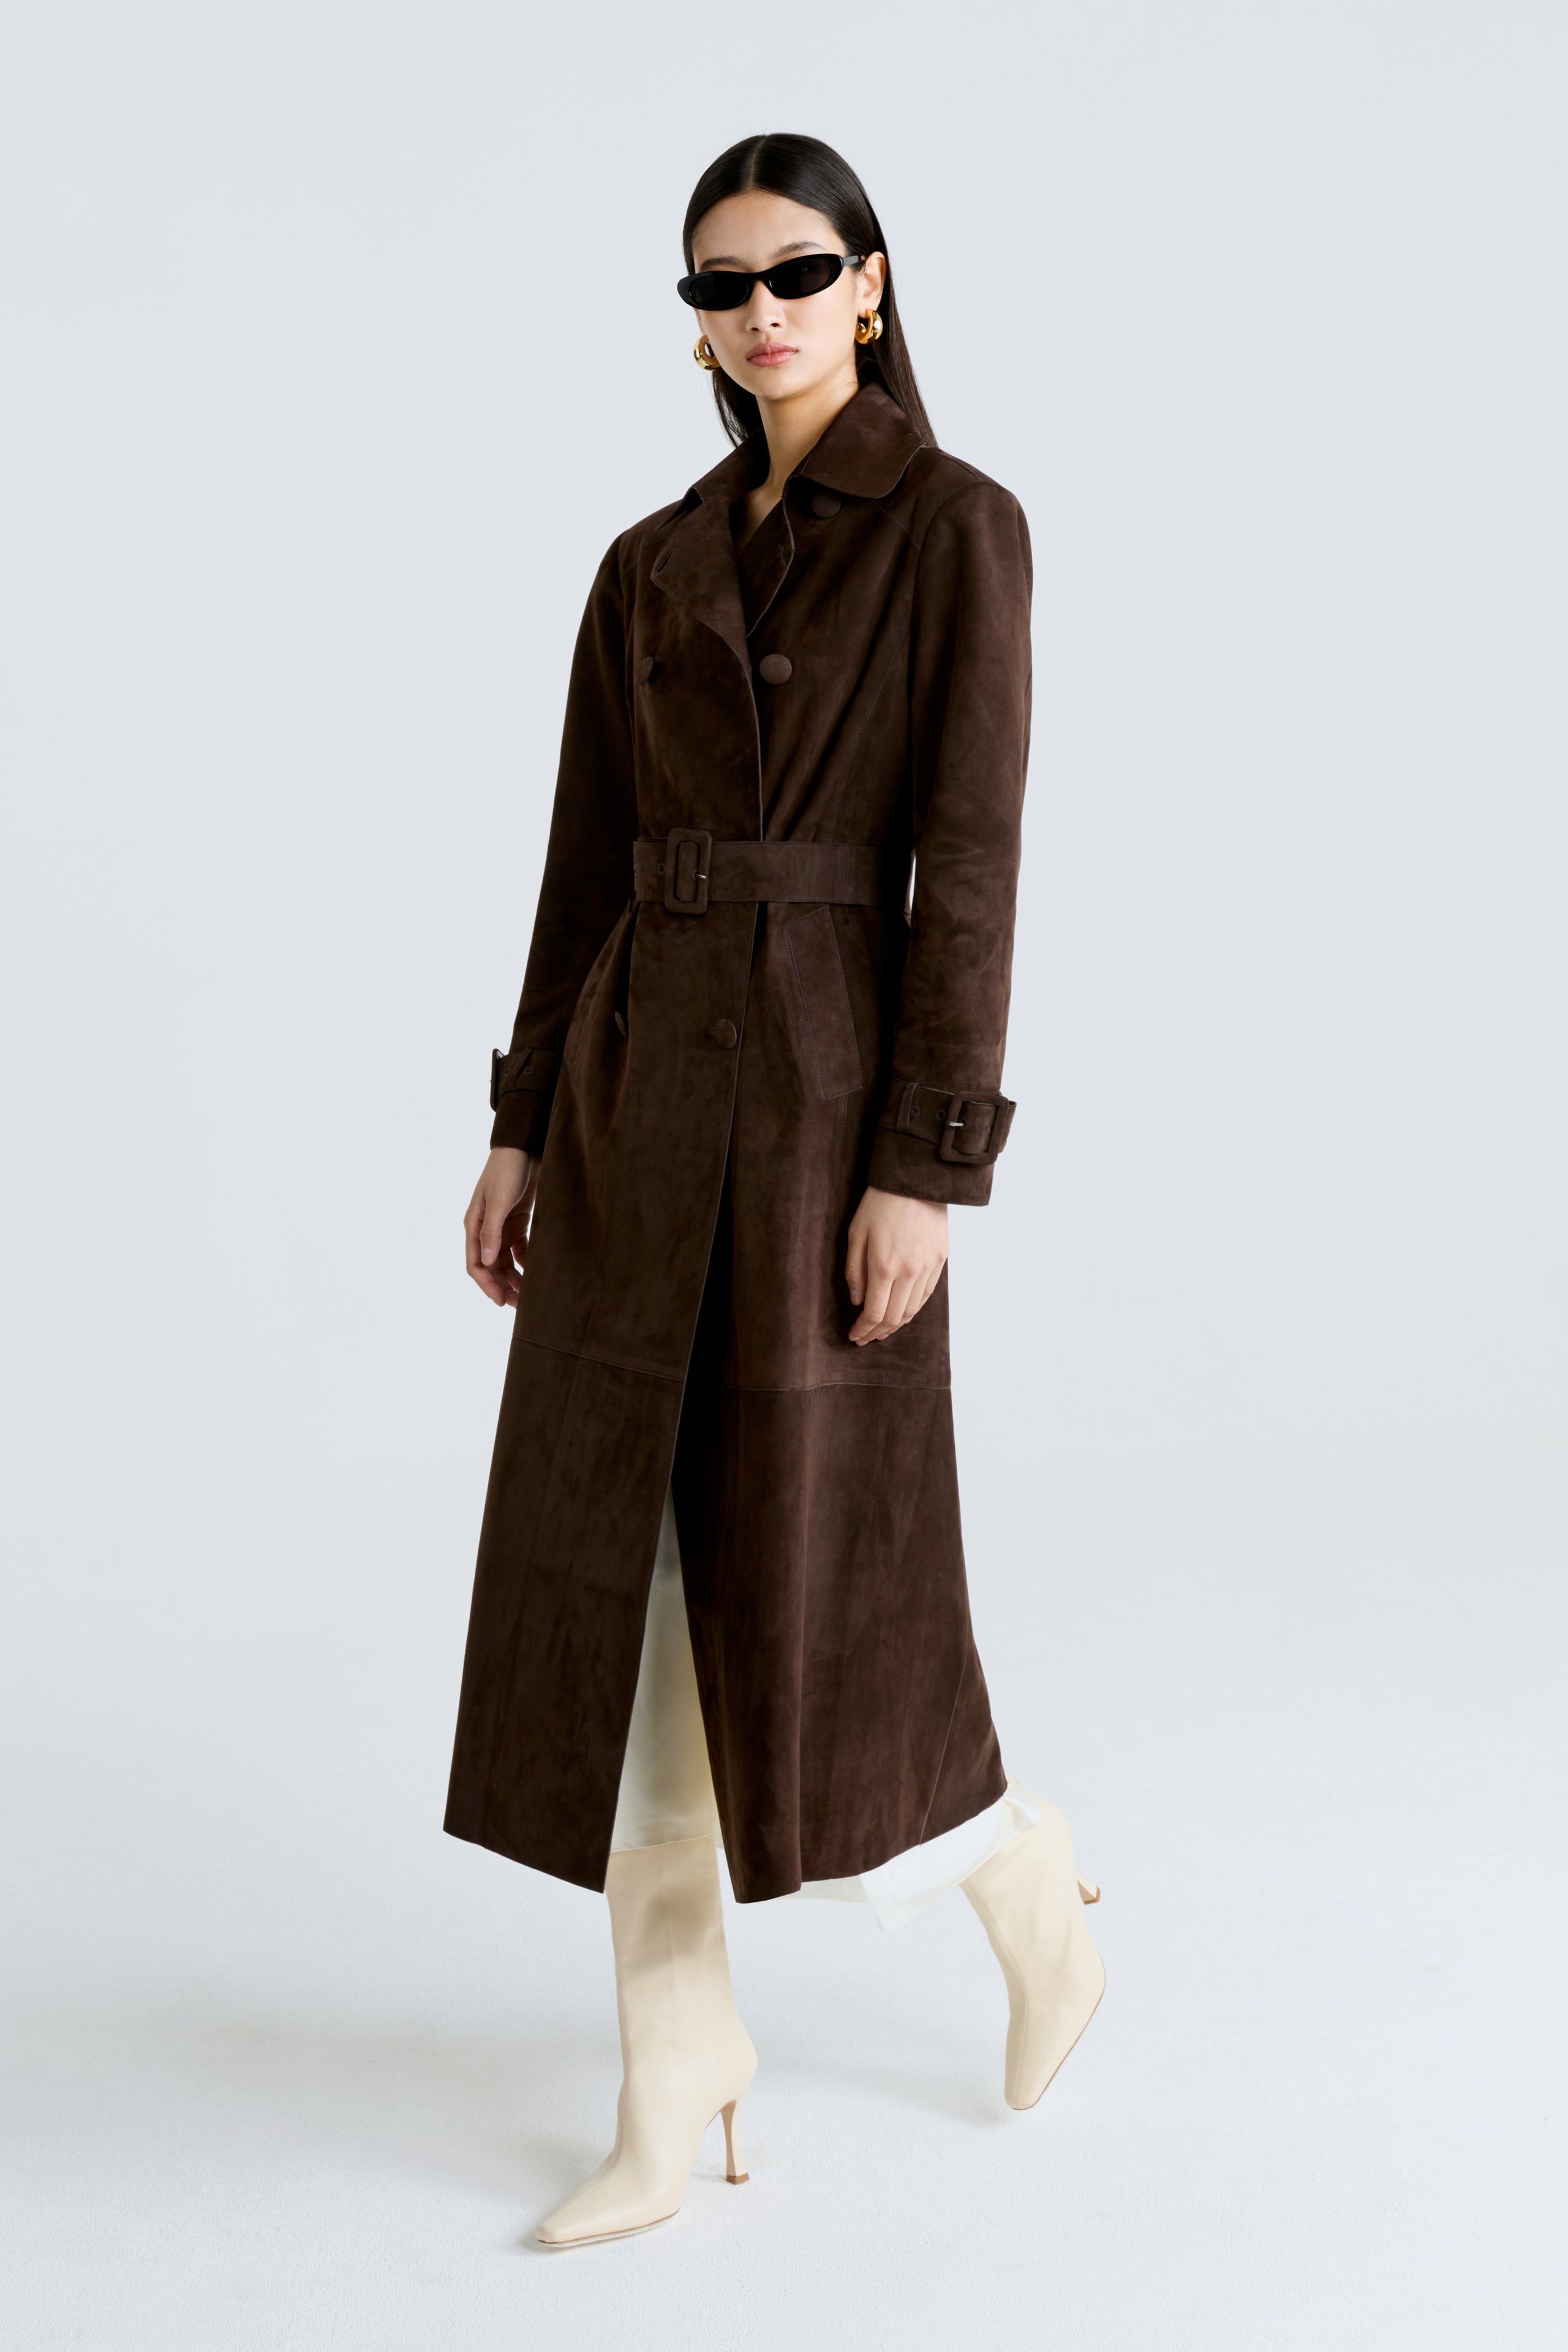 Model is wearing the Tate Mocha Everyday Suede Trench Coat Side